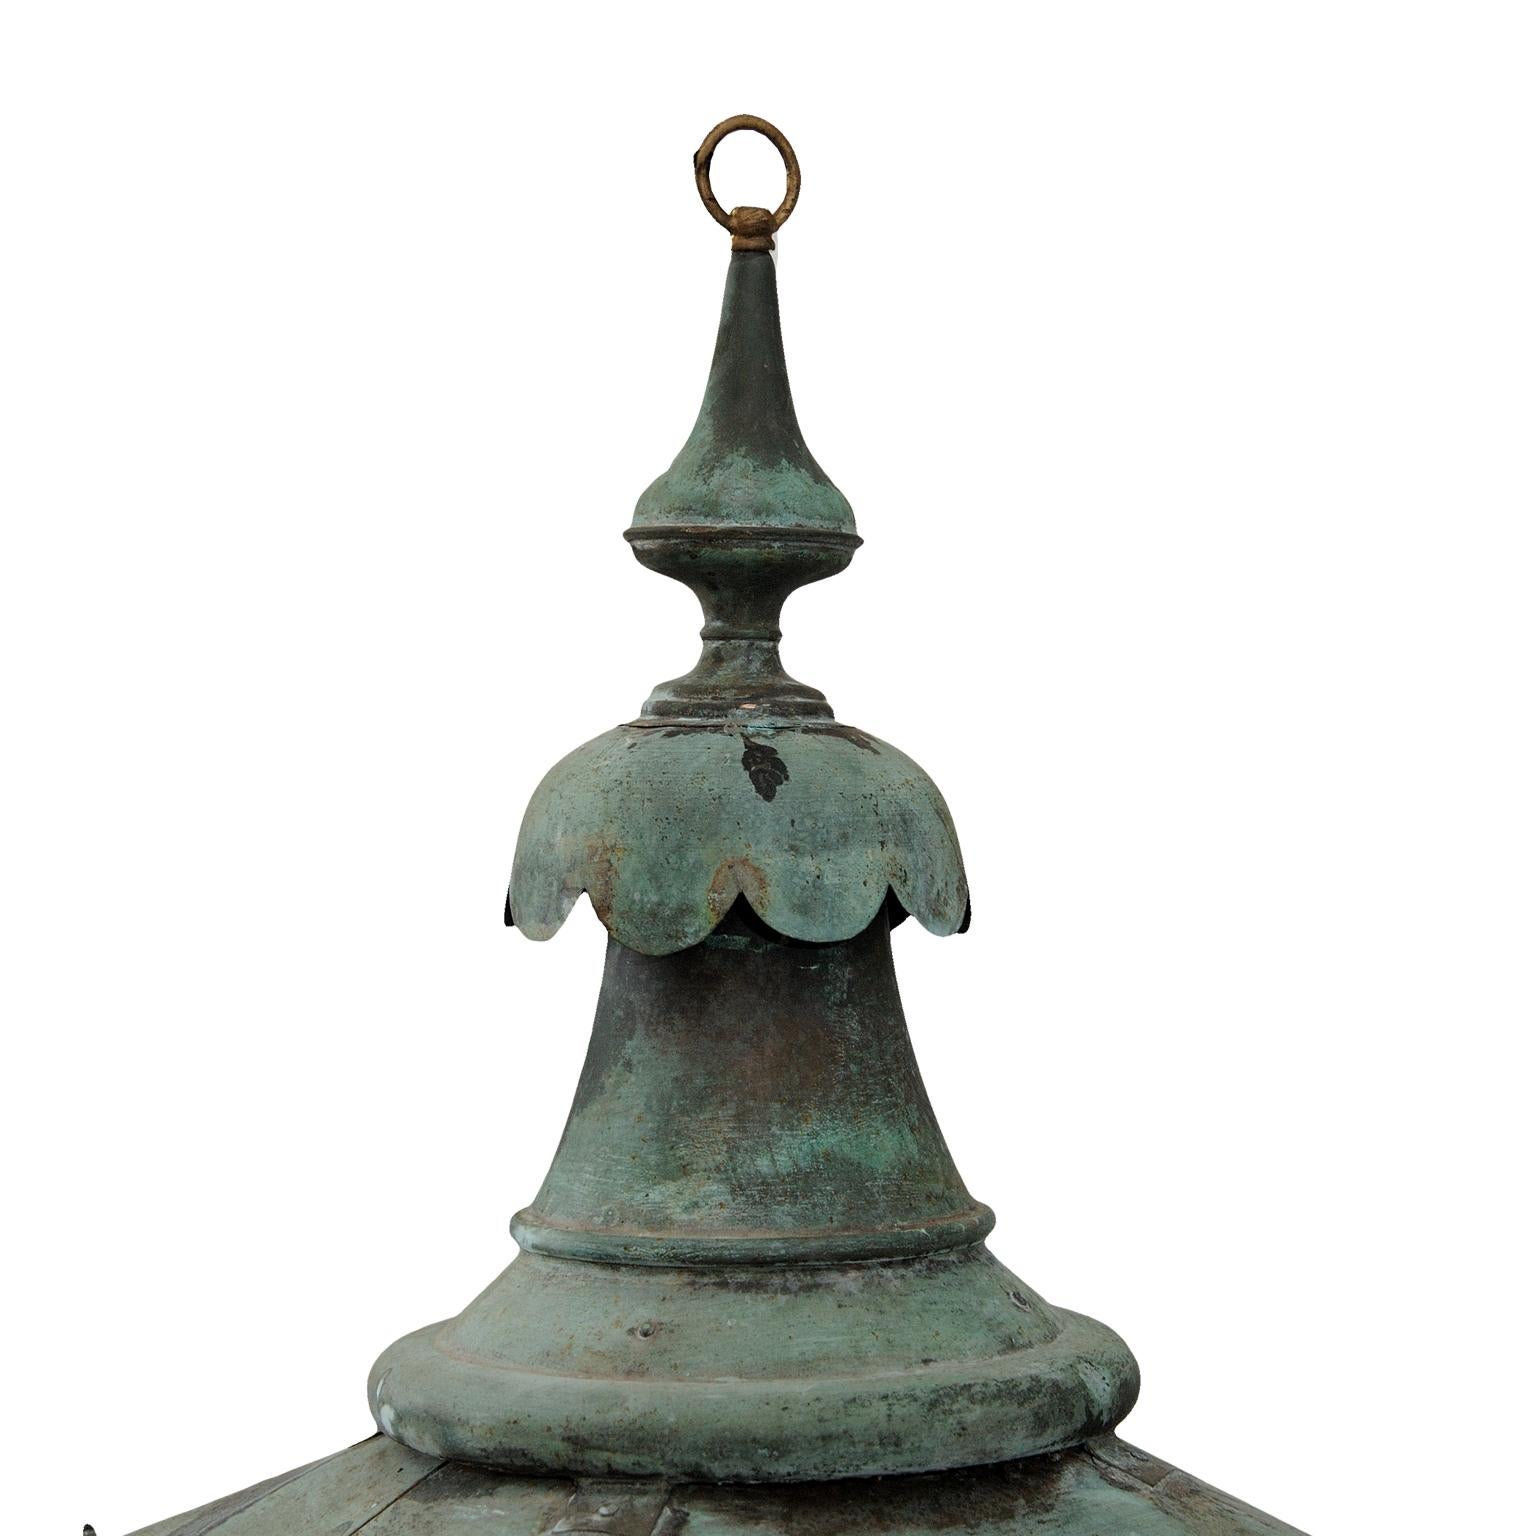 This is one of our stunning large mid-19th century English verdigris copper hanging Lanterns, now converted to electricity and PAT tested, suitable for interior or exterior use. Complete with lions paw feet and brass makers name plate, W.Parkinson &